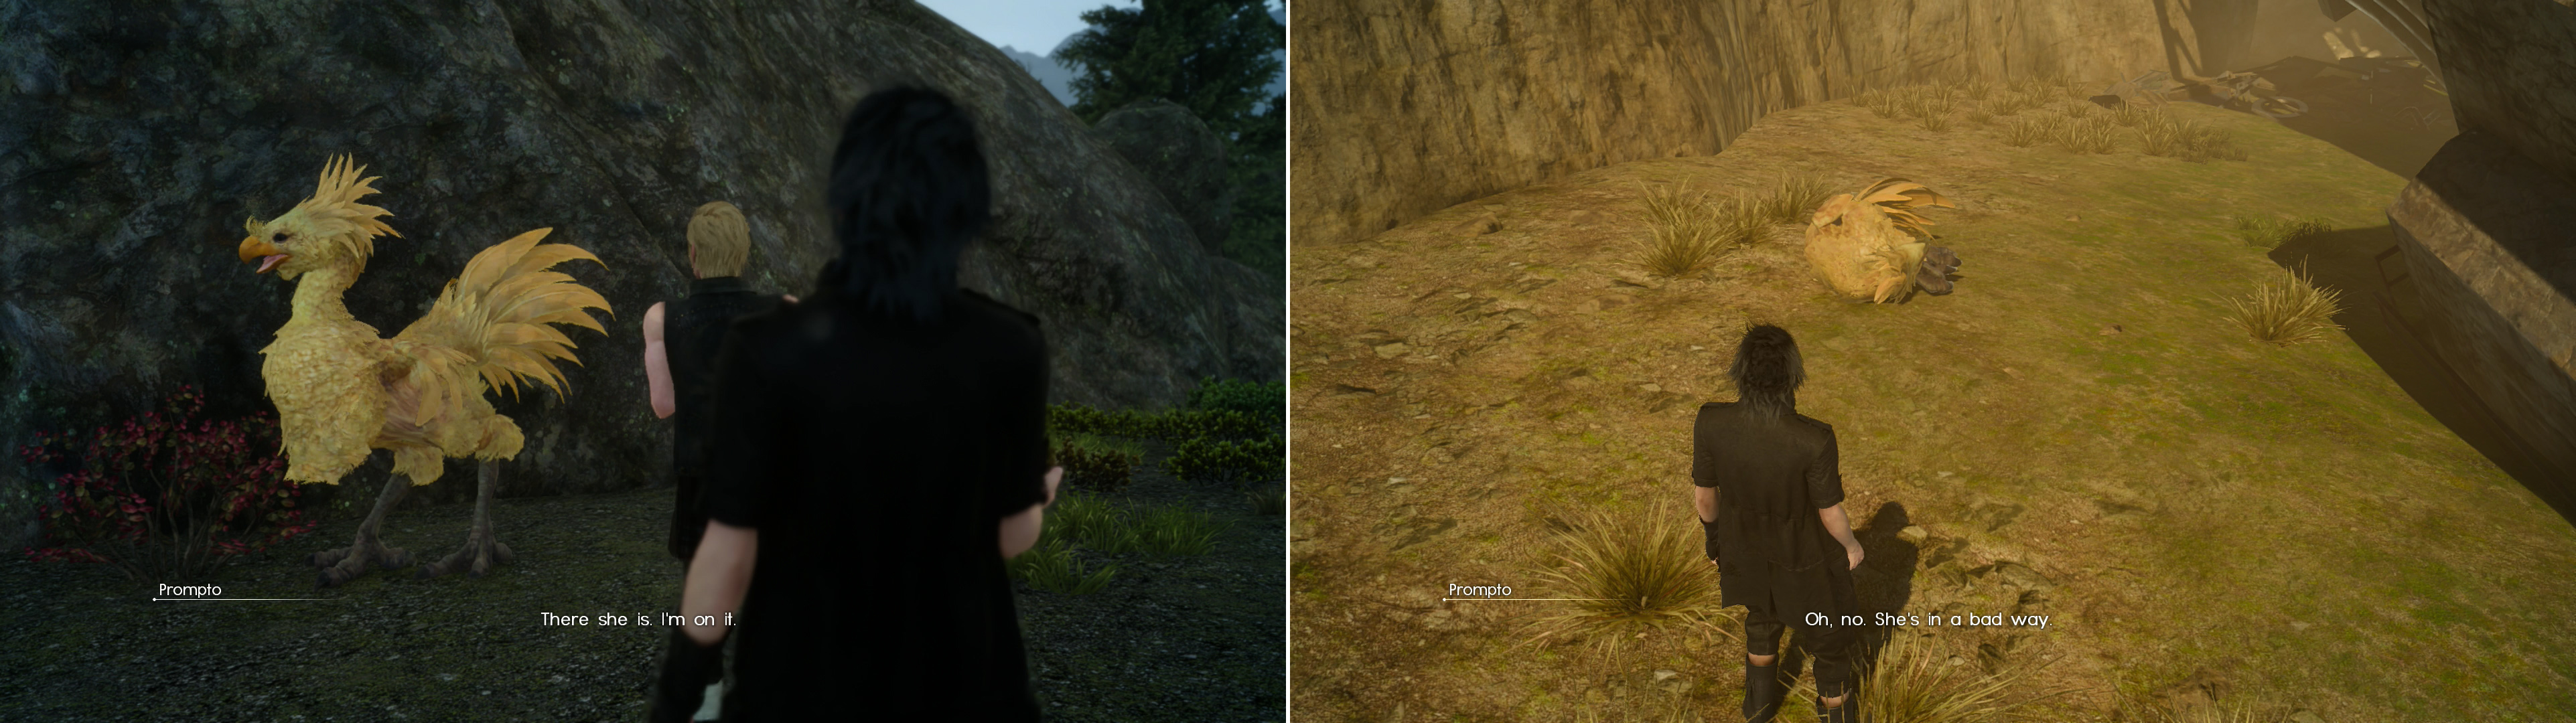 After proving yourself against Deadeye, Wiz will give you quests ranging from photographic wild Chocobos (left) to snatching injured birds out of the jaws of predators (right).